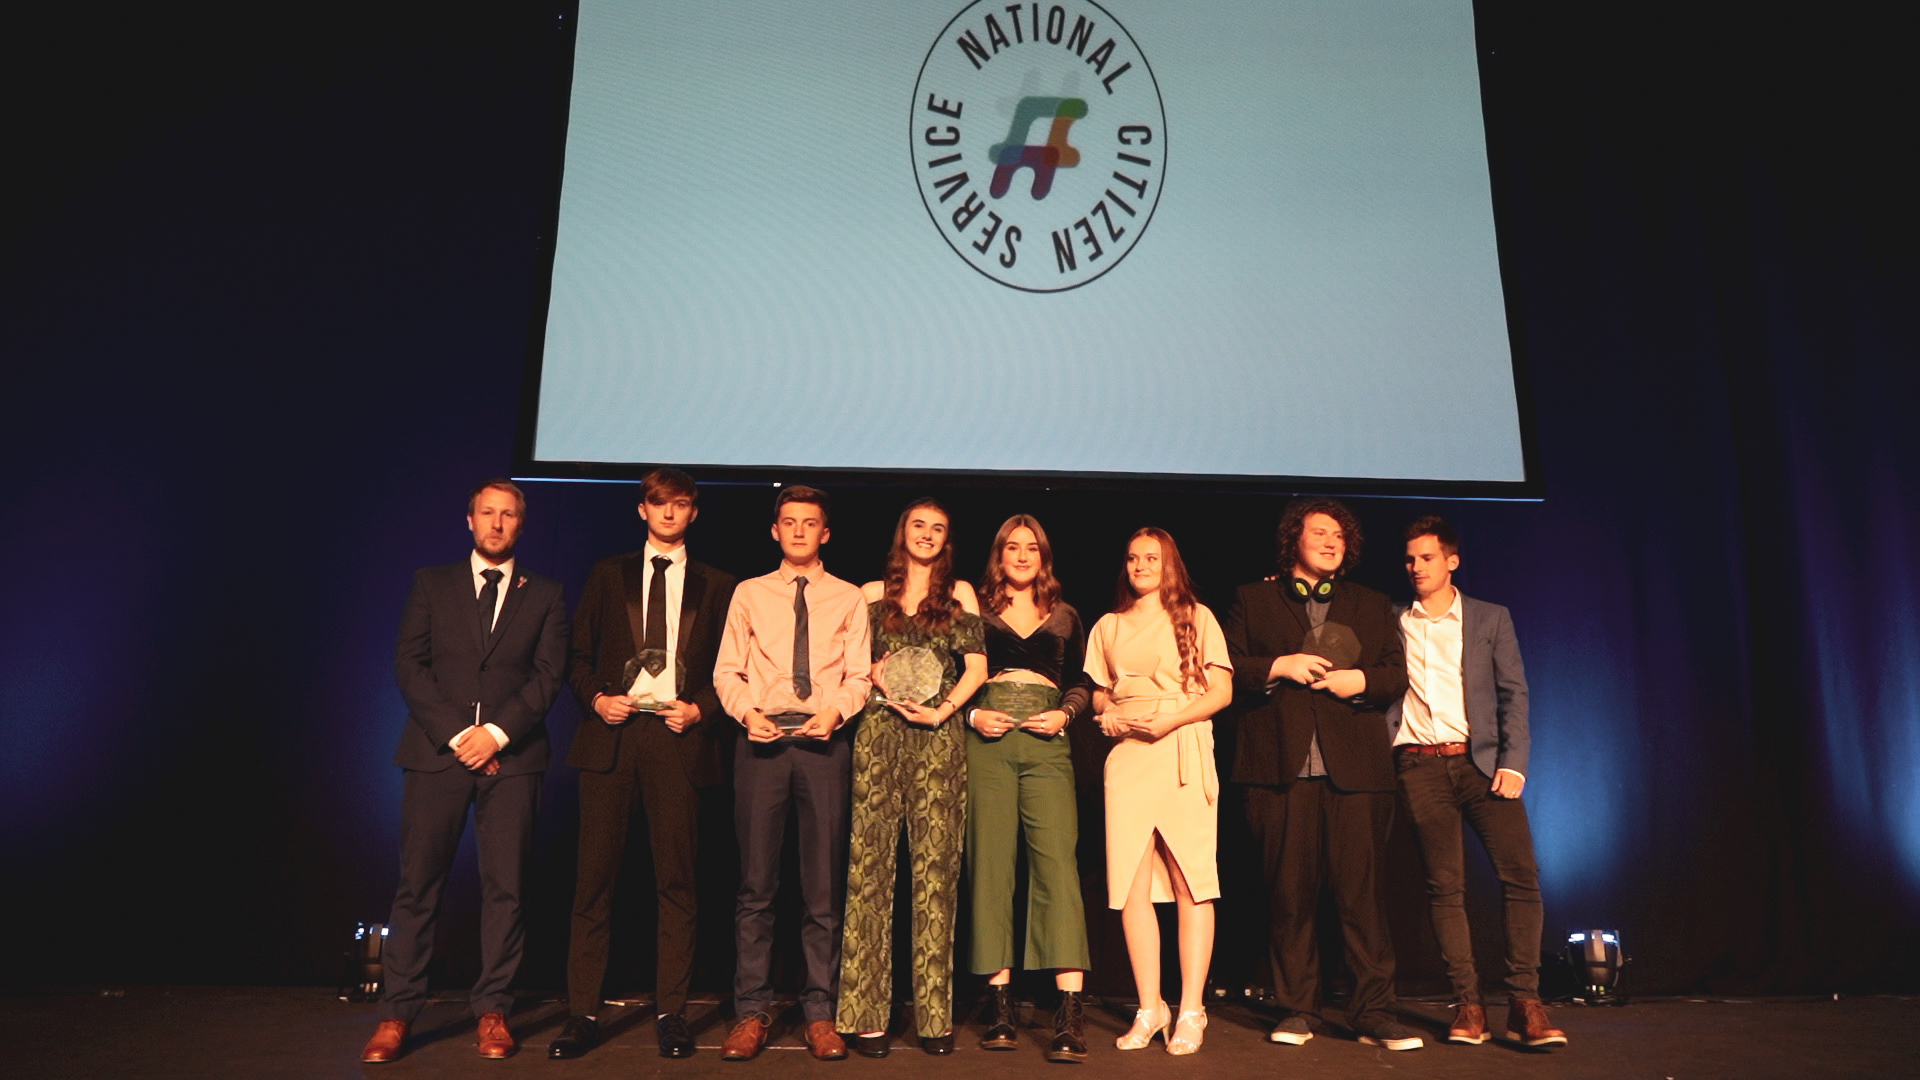 Ncs Autumn 19 Grimsby Town Sports Education Trust